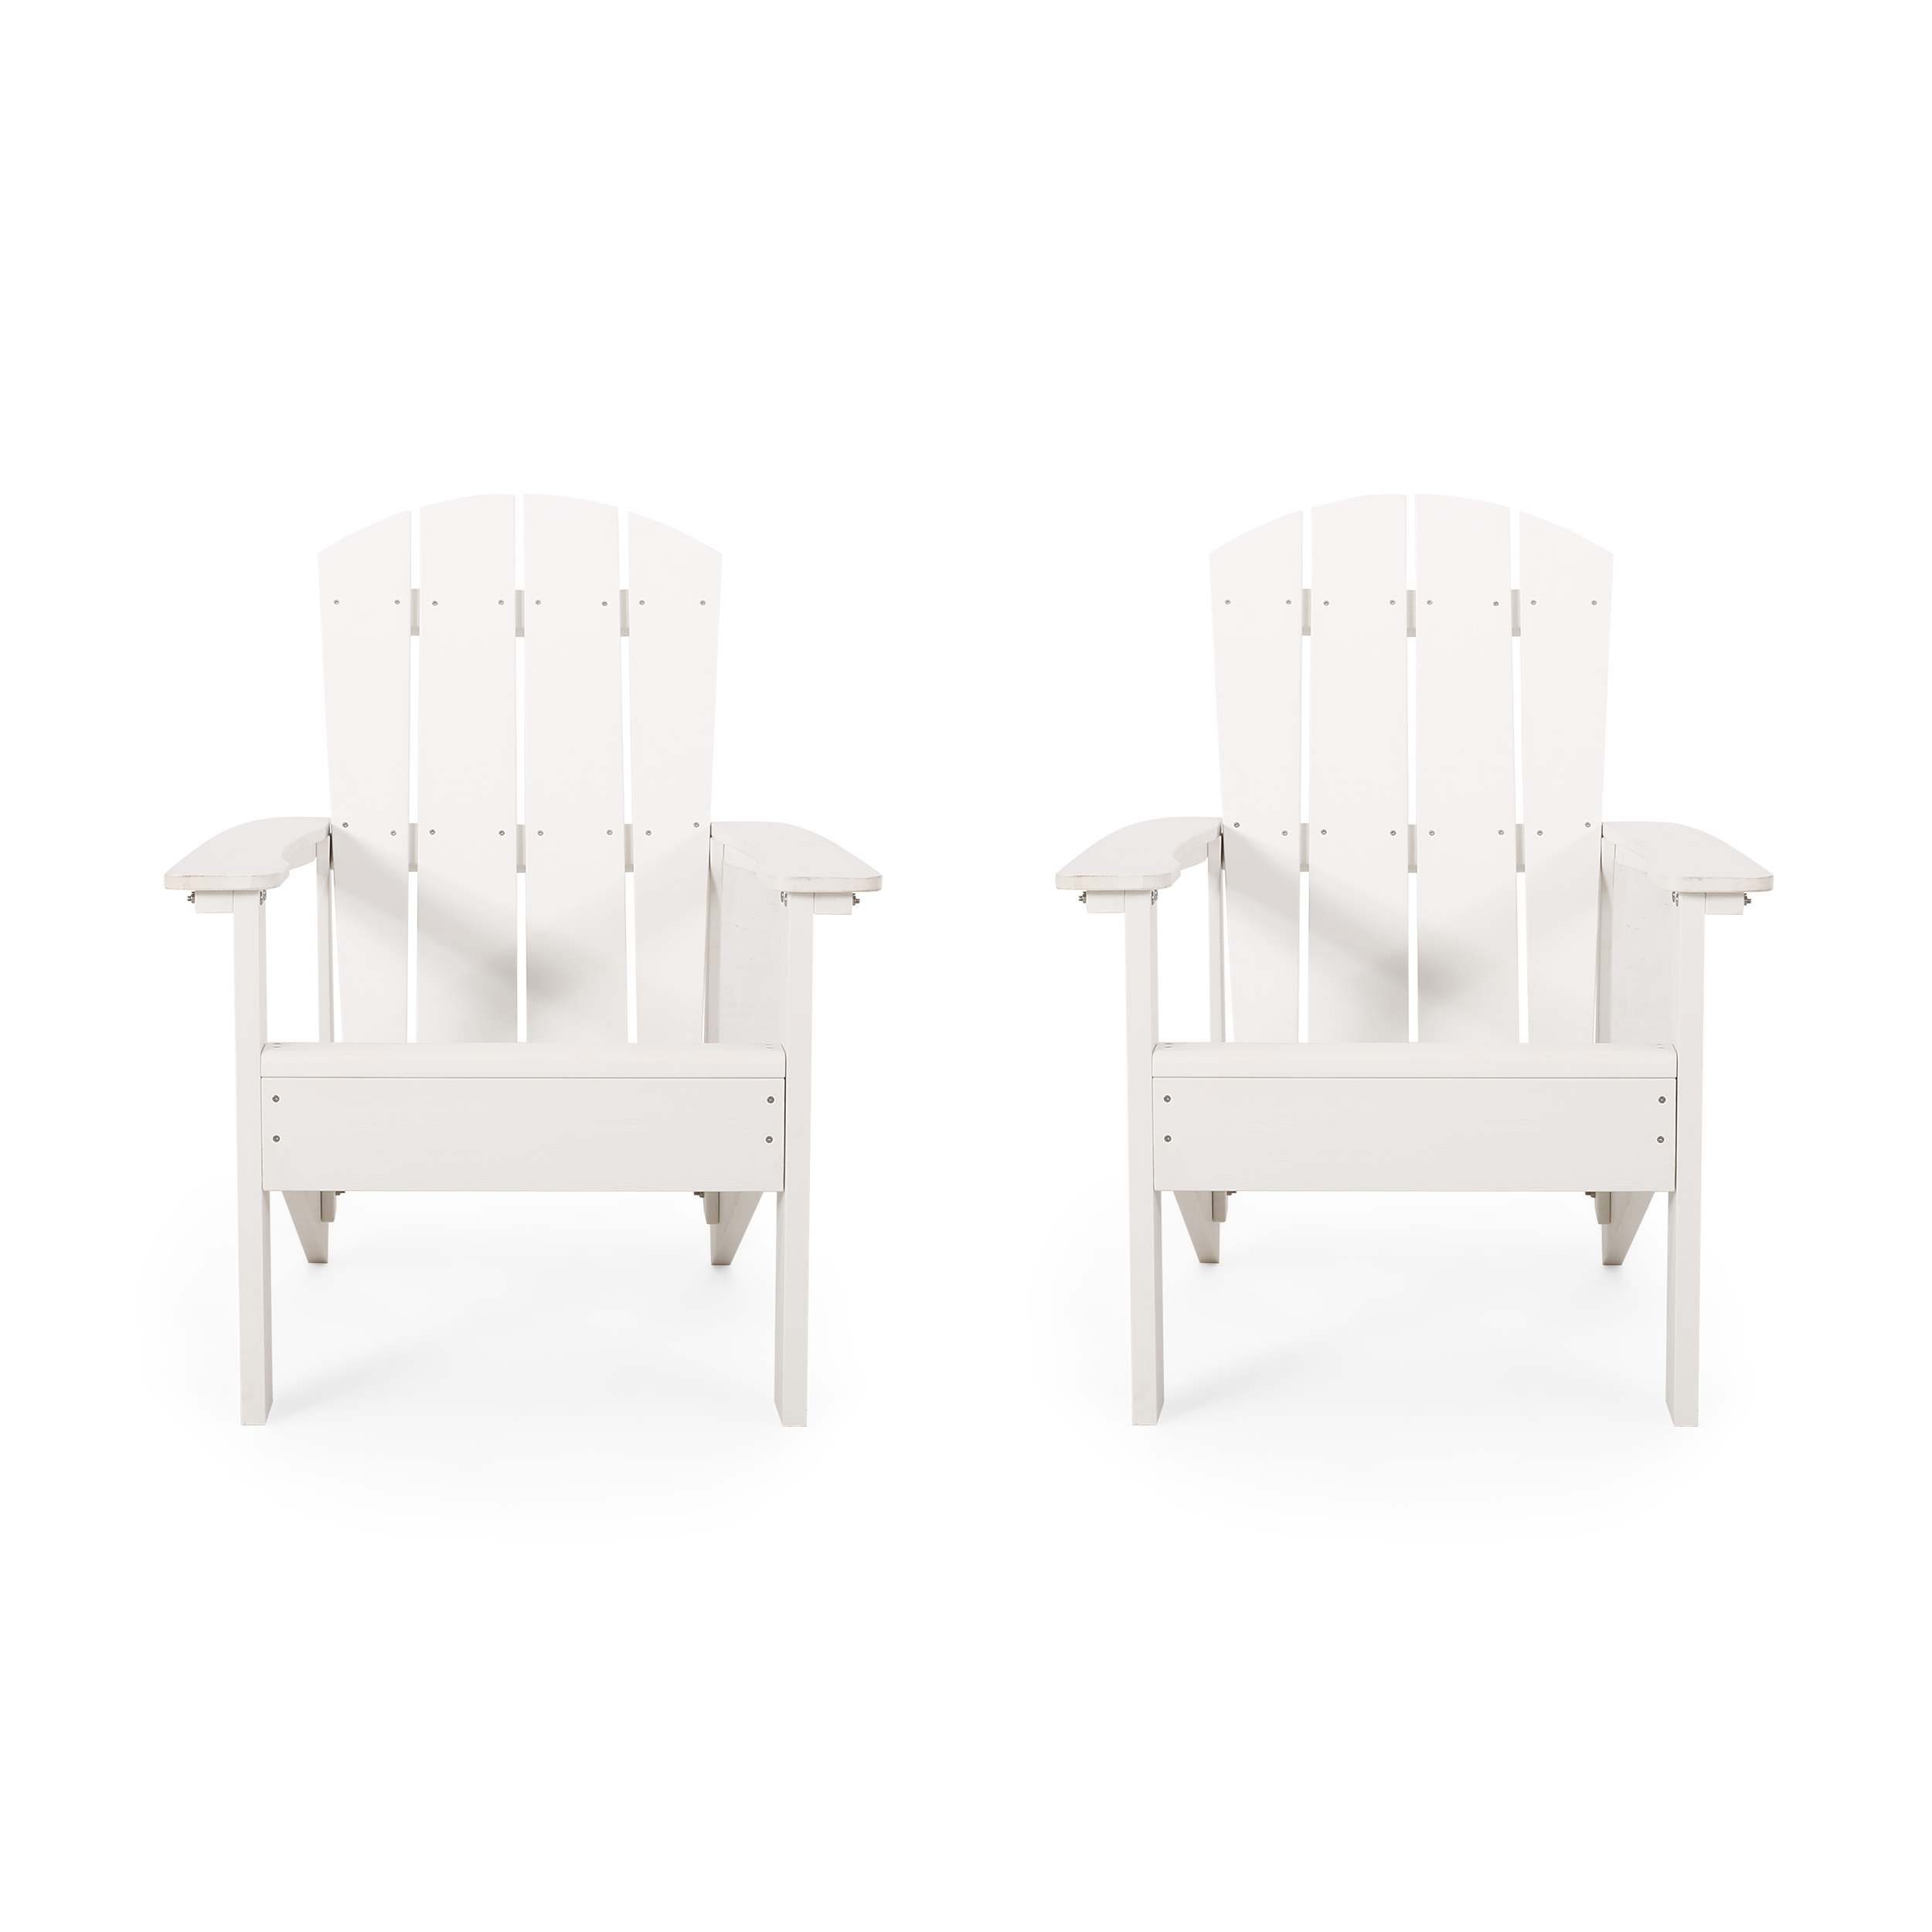 Noble House Culver Faux Wood Slat-Backed Adirondack Chair in White (Set of 2) - image 1 of 7